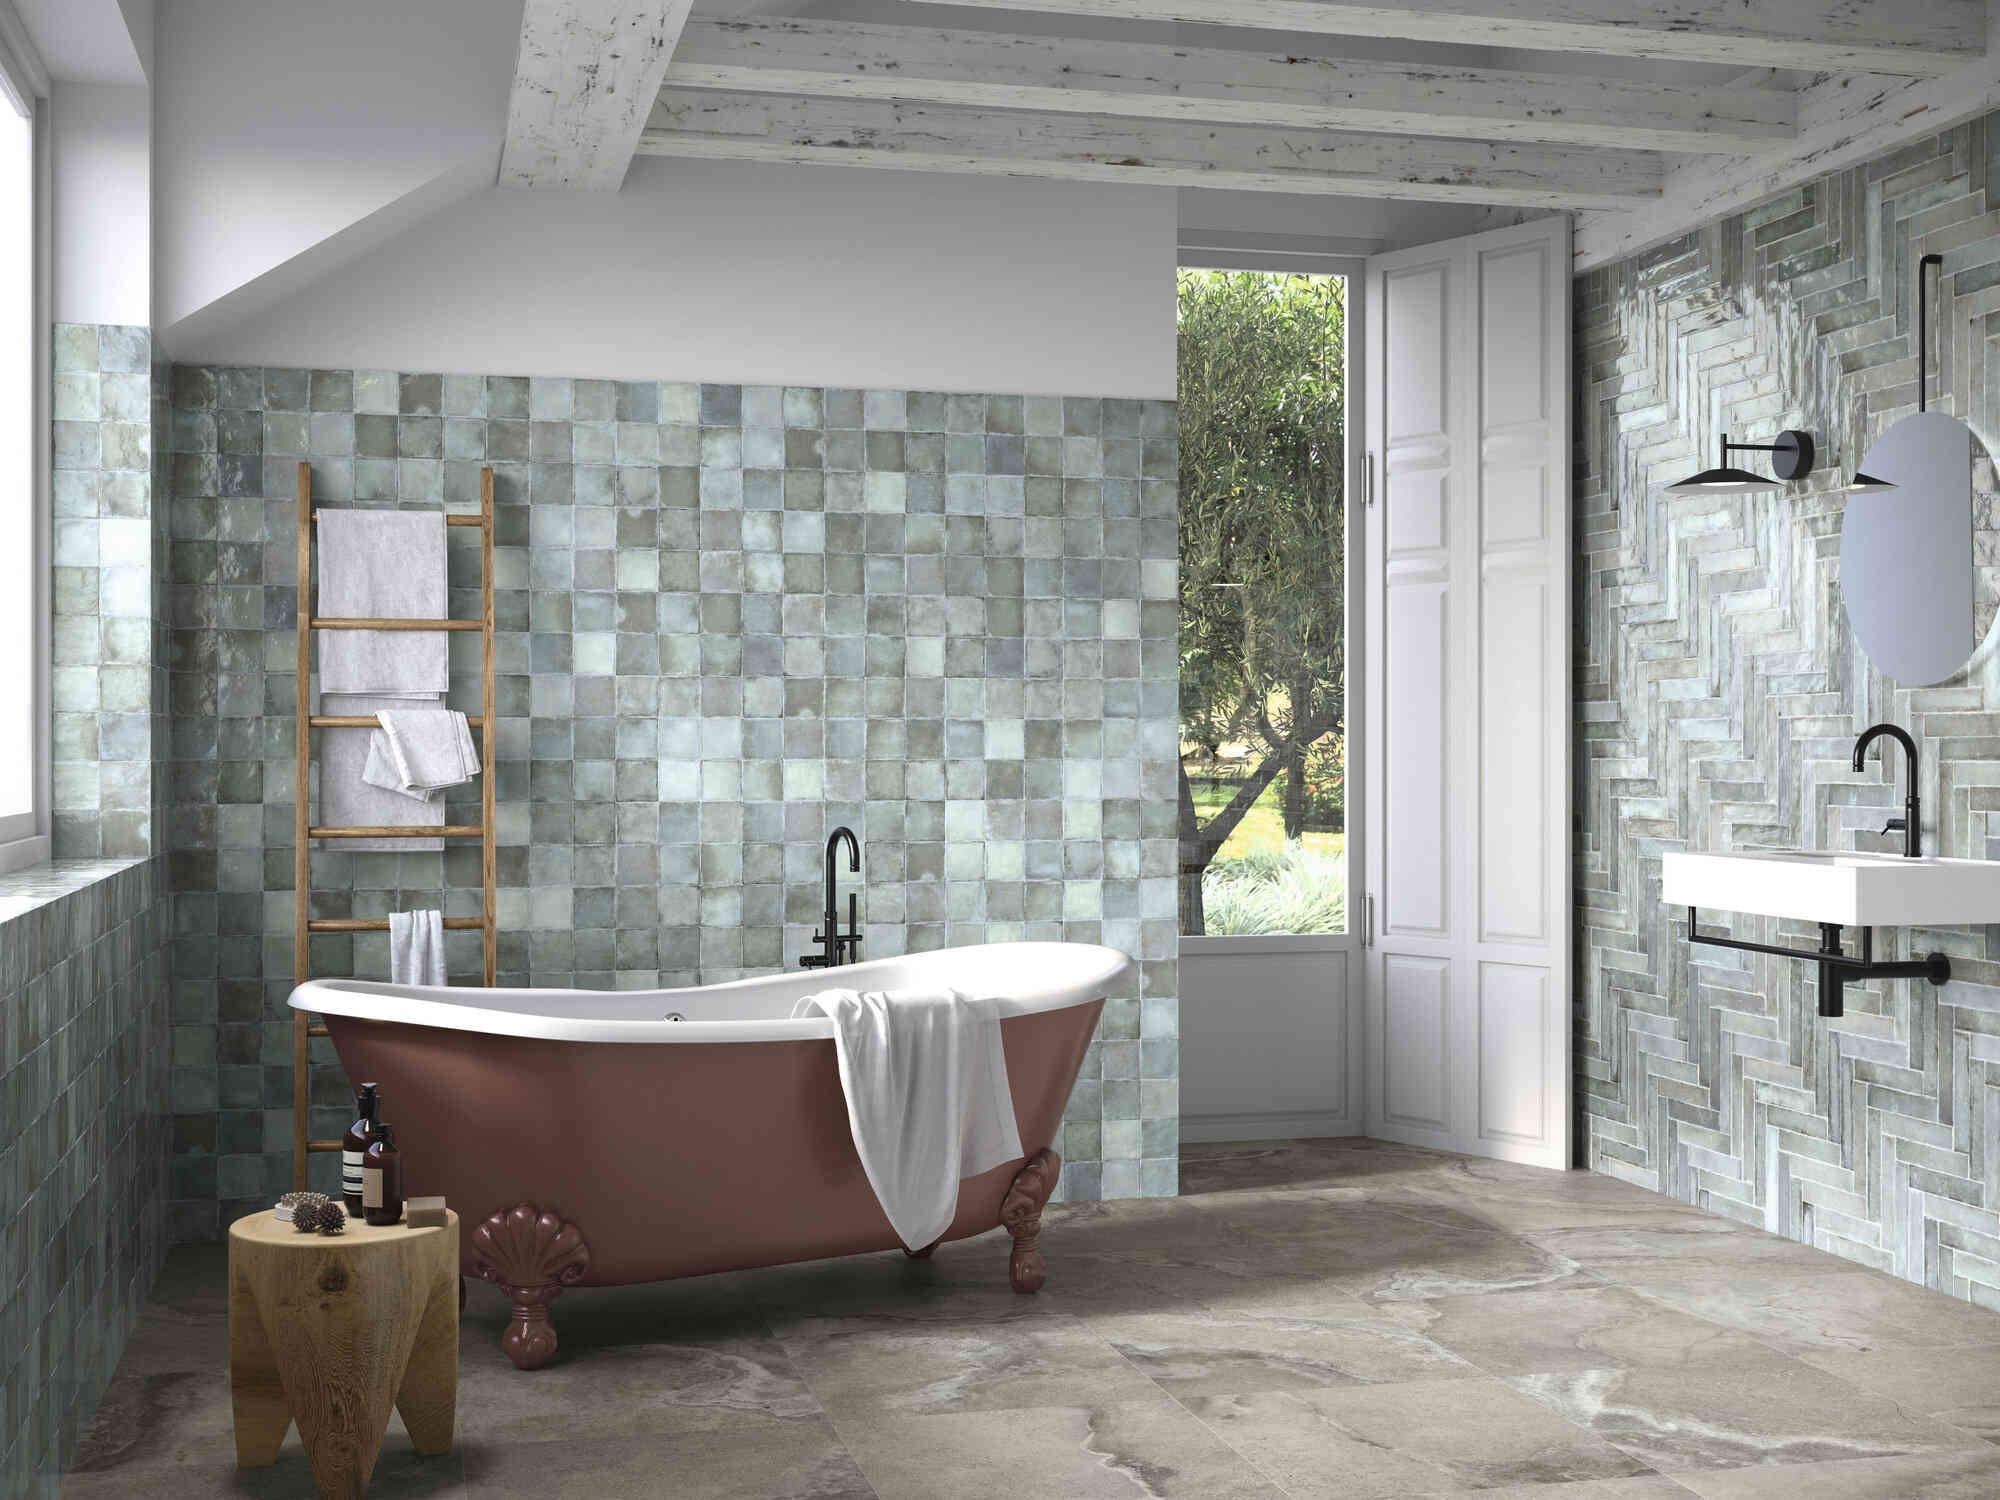 Local Tile  Ape Cross Taupe Walls Are Special Order  Savannah Berilo Amb 3 Savannah Berilo Amb 3 Sz1